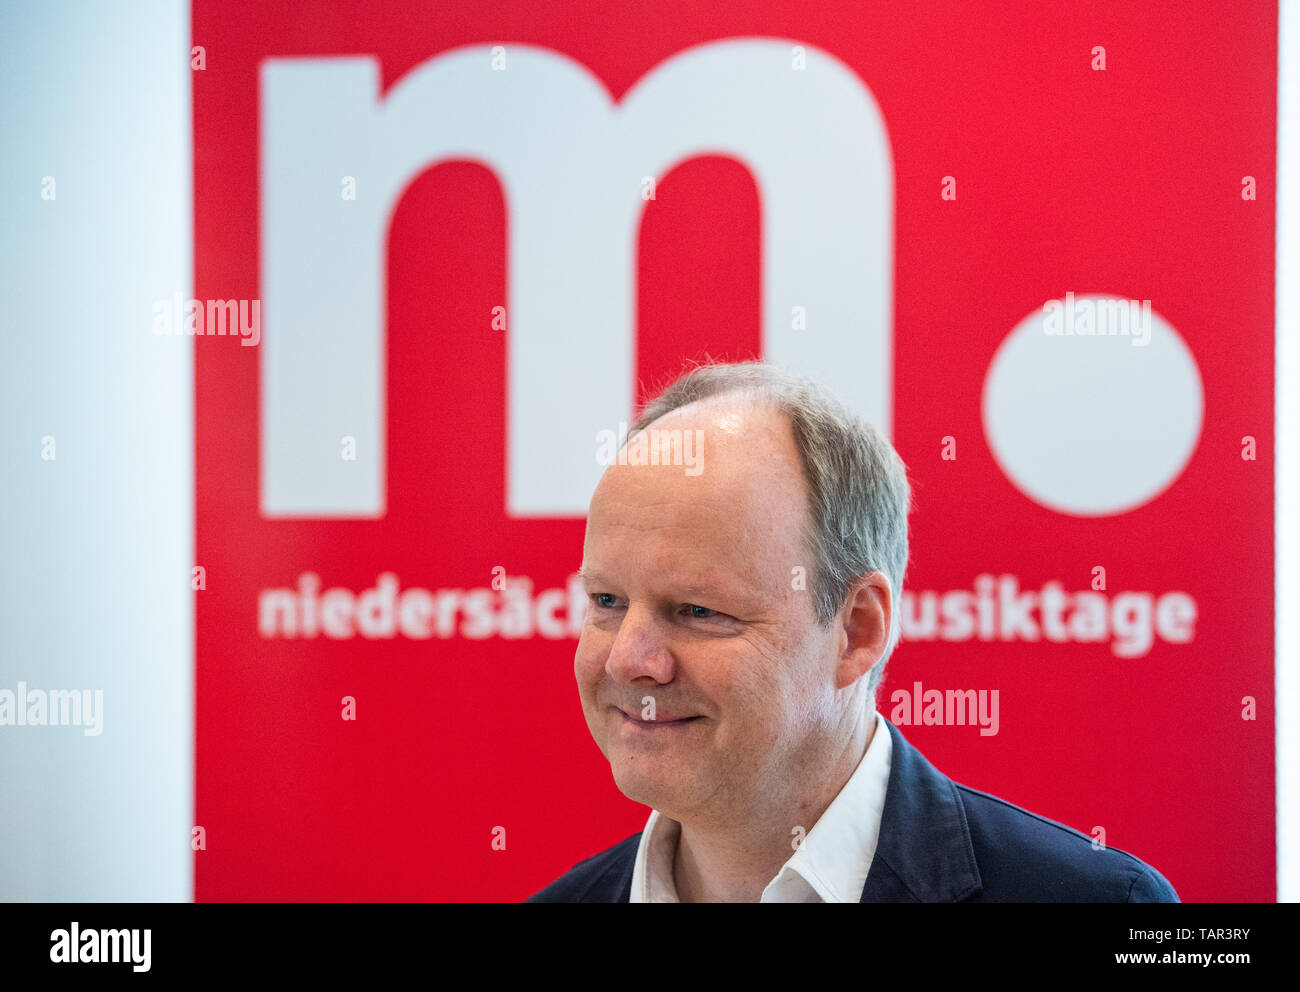 Hanover, Germany. 27th May, 2019. Anselm Cybinski, director of the Niedersächsische Musiktage, is at a press conference on the Niedersächsische Musiktage. Credit: Christophe Gateau/dpa/Alamy Live News Stock Photo